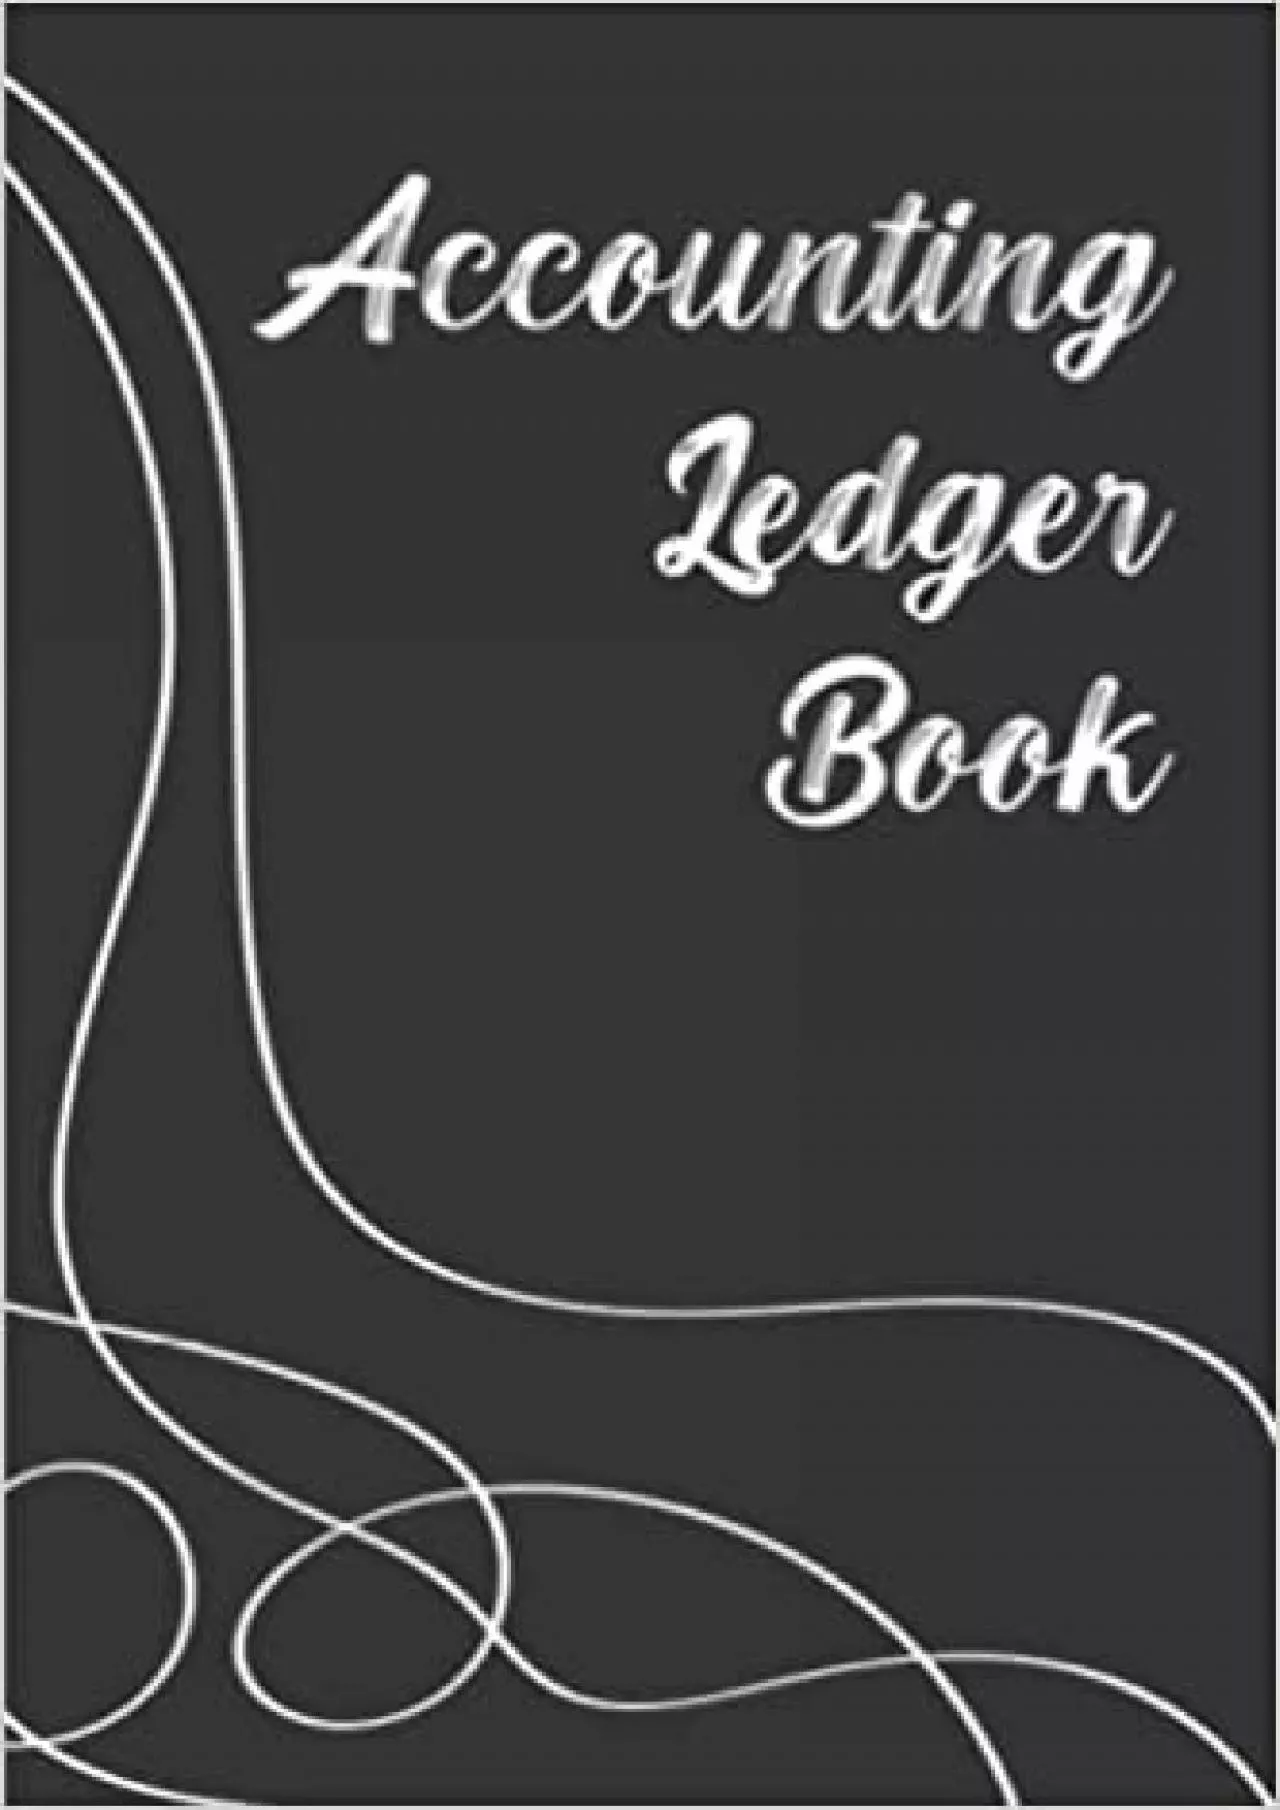 Accounting ledger book: Business Ledger for Small Business or Personal Use Simple Accounting